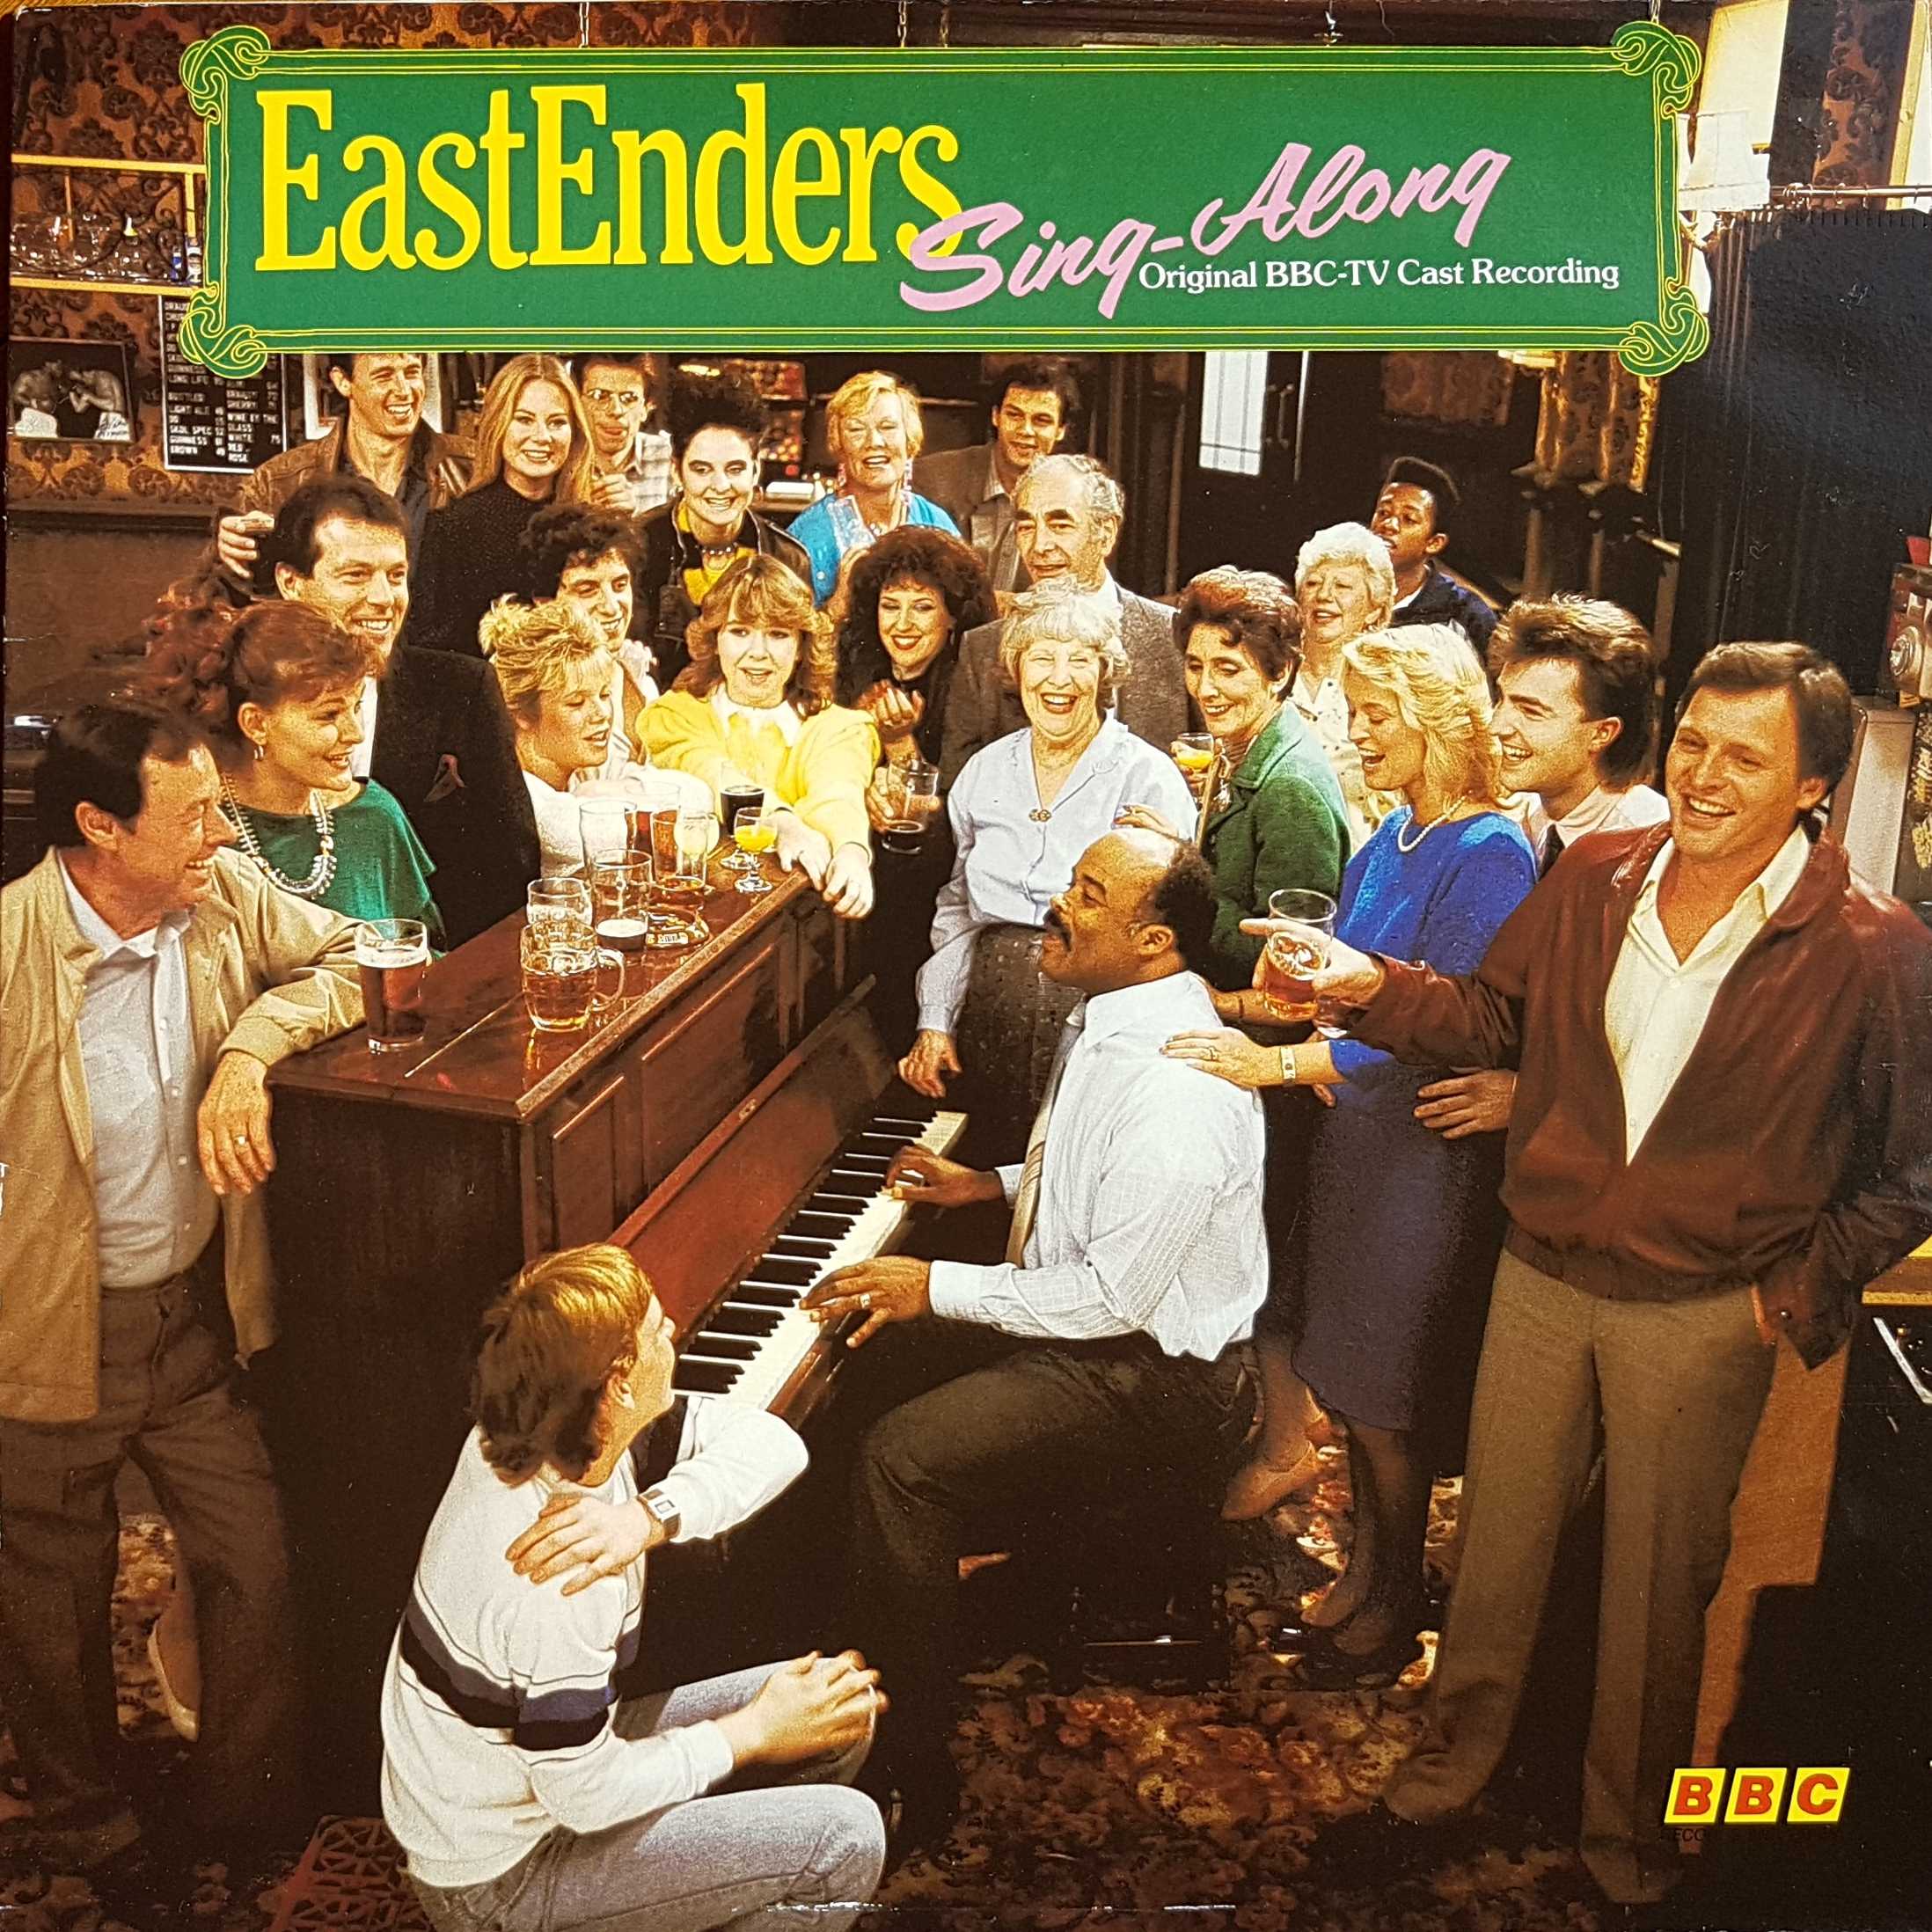 Picture of REB 586 EastEnders singalong by artist Various from the BBC albums - Records and Tapes library